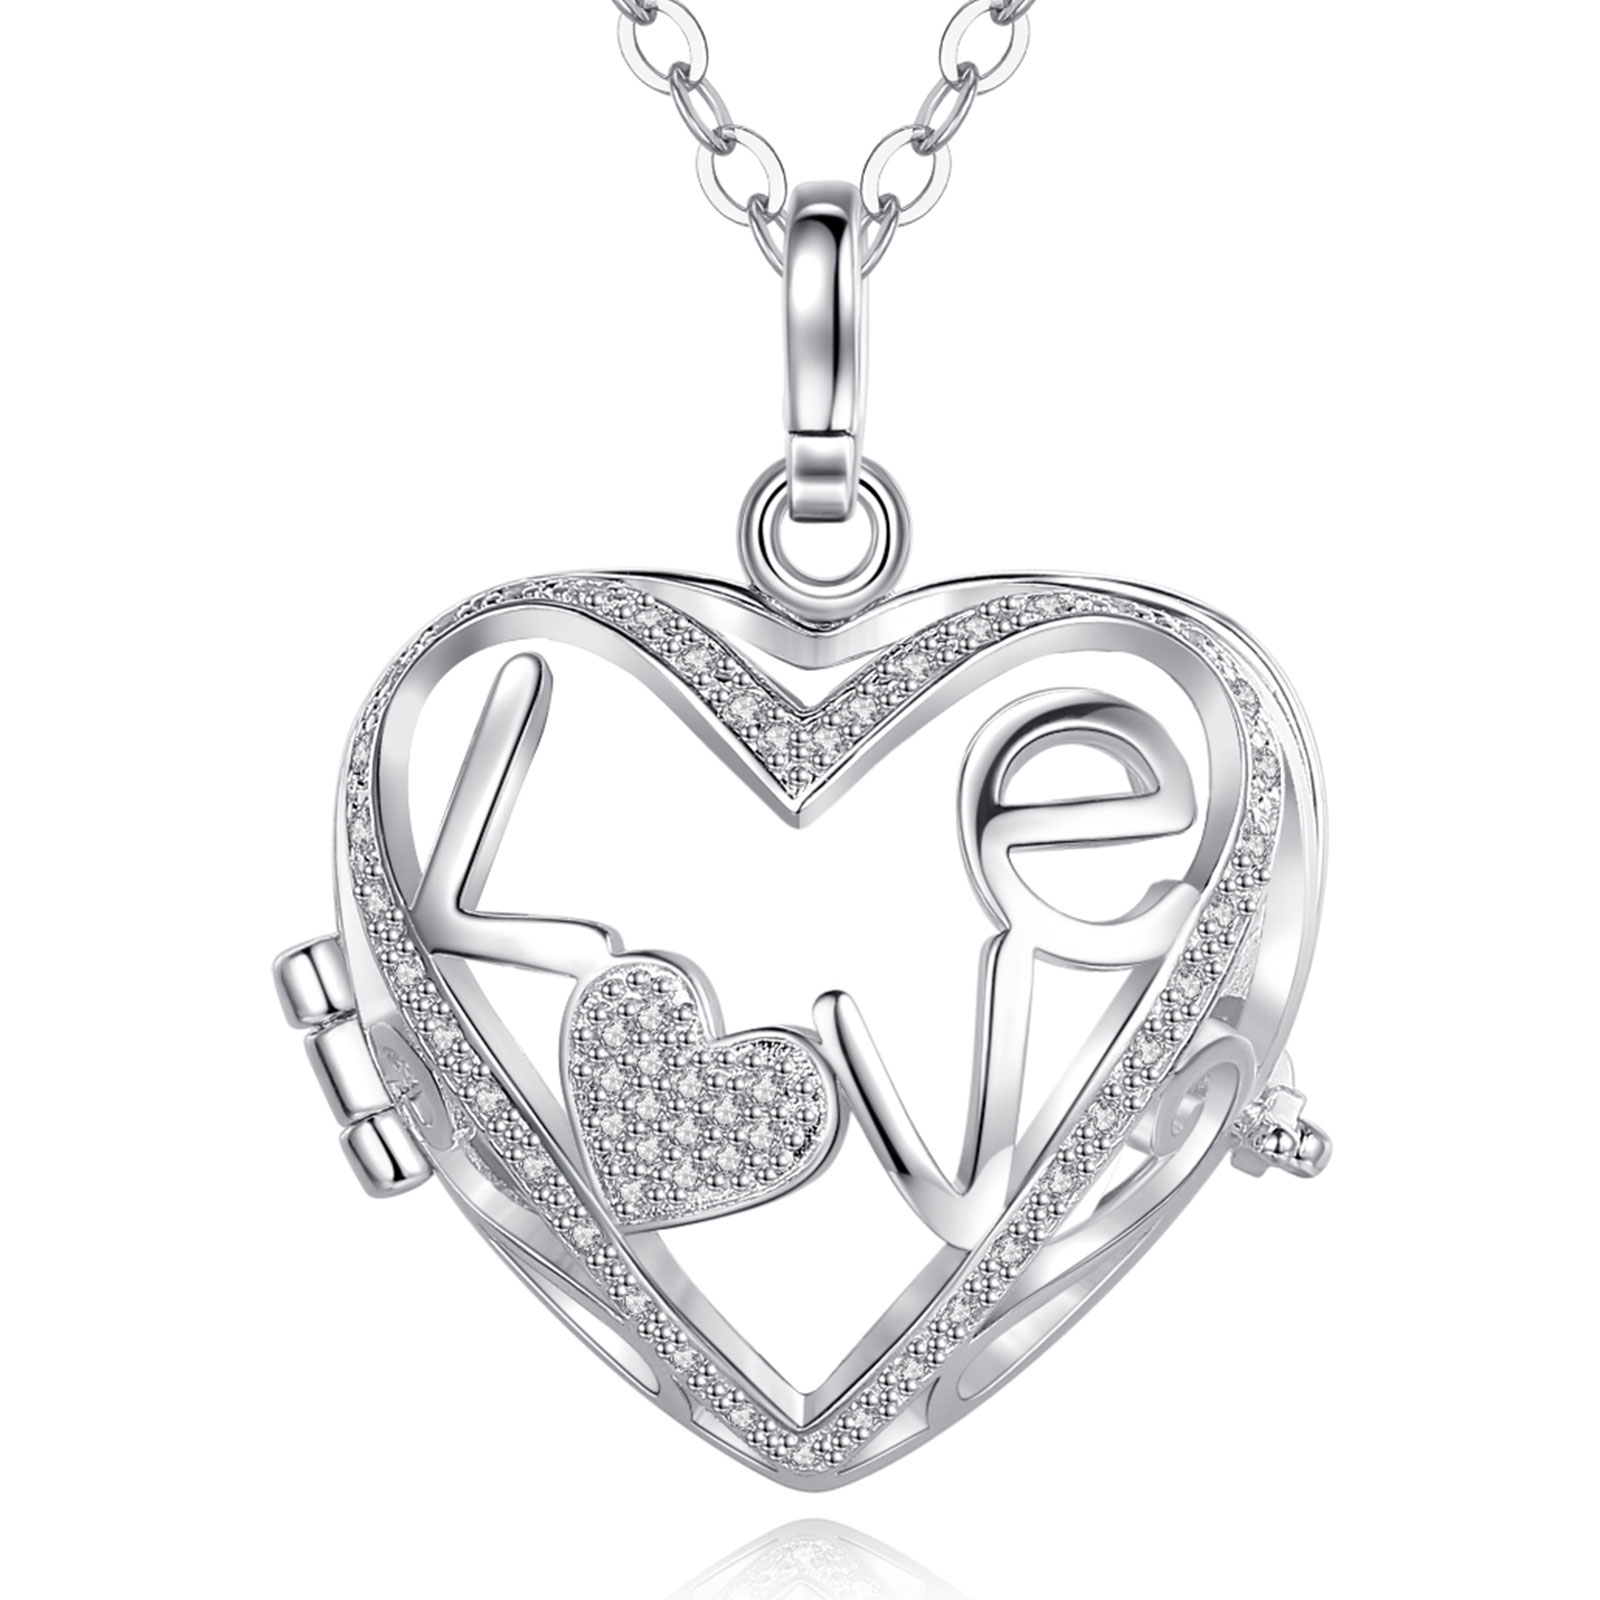 Merryshine Jewelry S925 Sterling Silver Heart Shaped Hollow Out Cage Angel Chime Caller Necklace